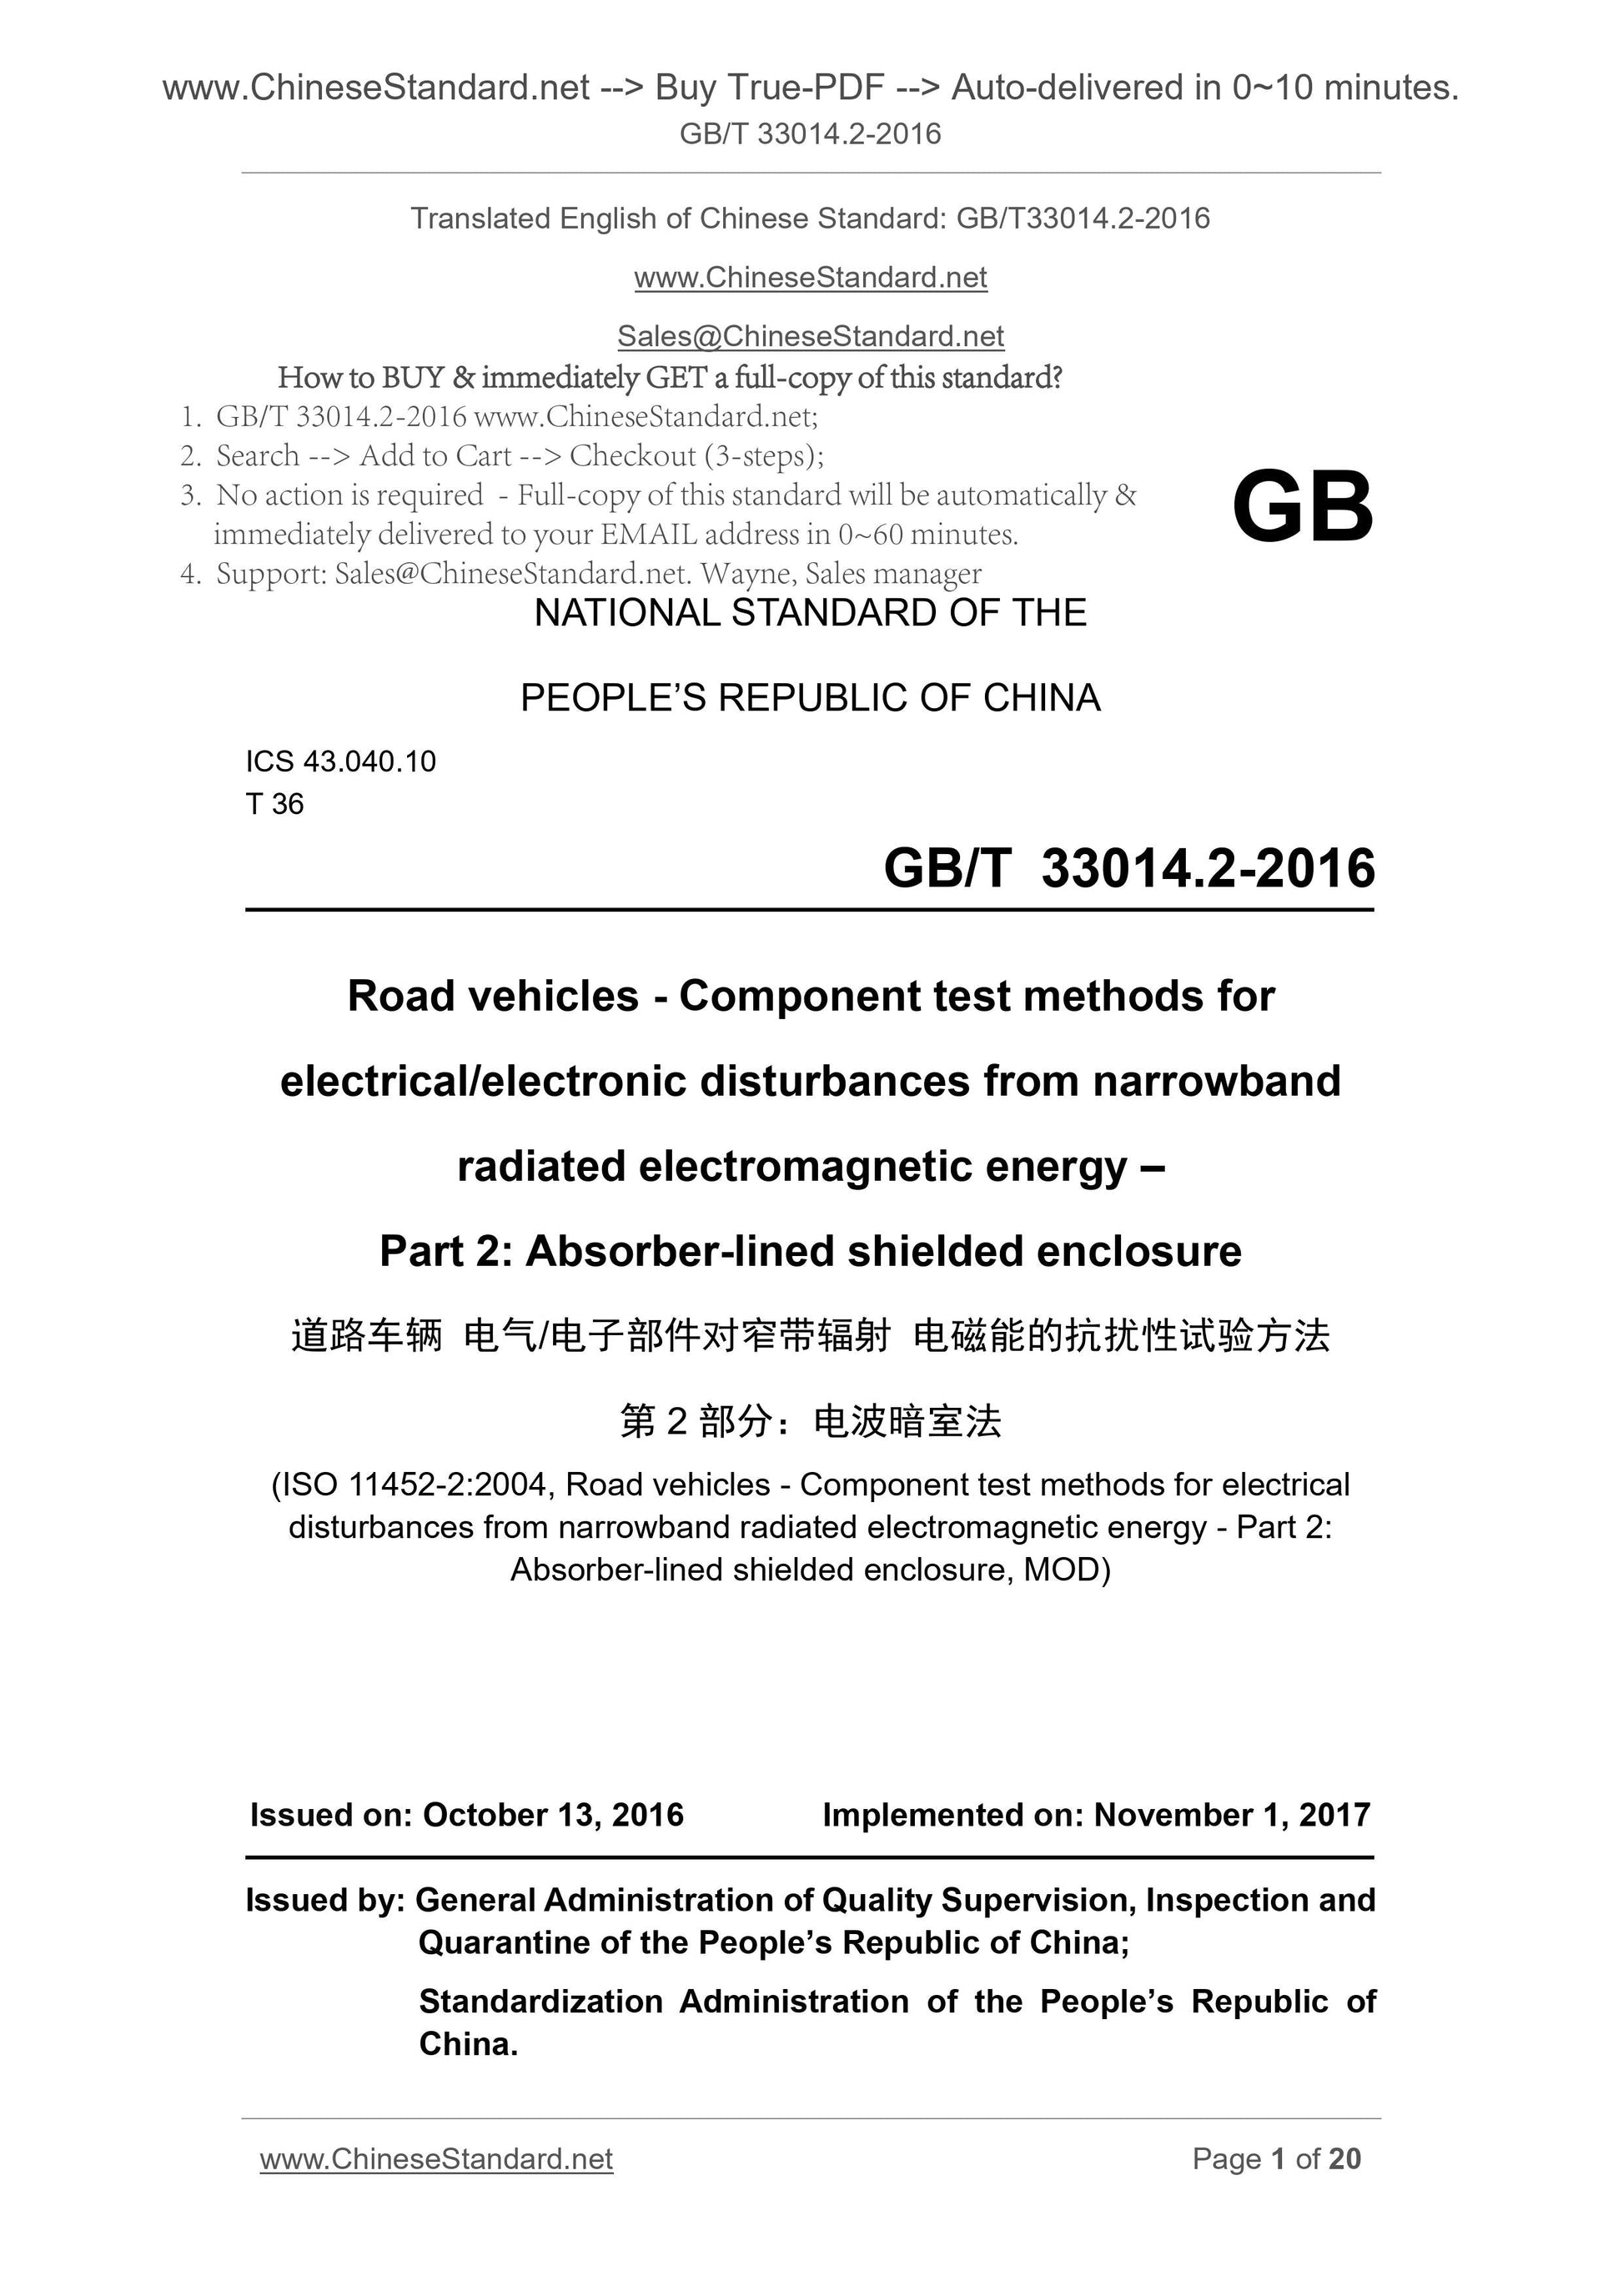 GB/T 33014.2-2016 Page 1